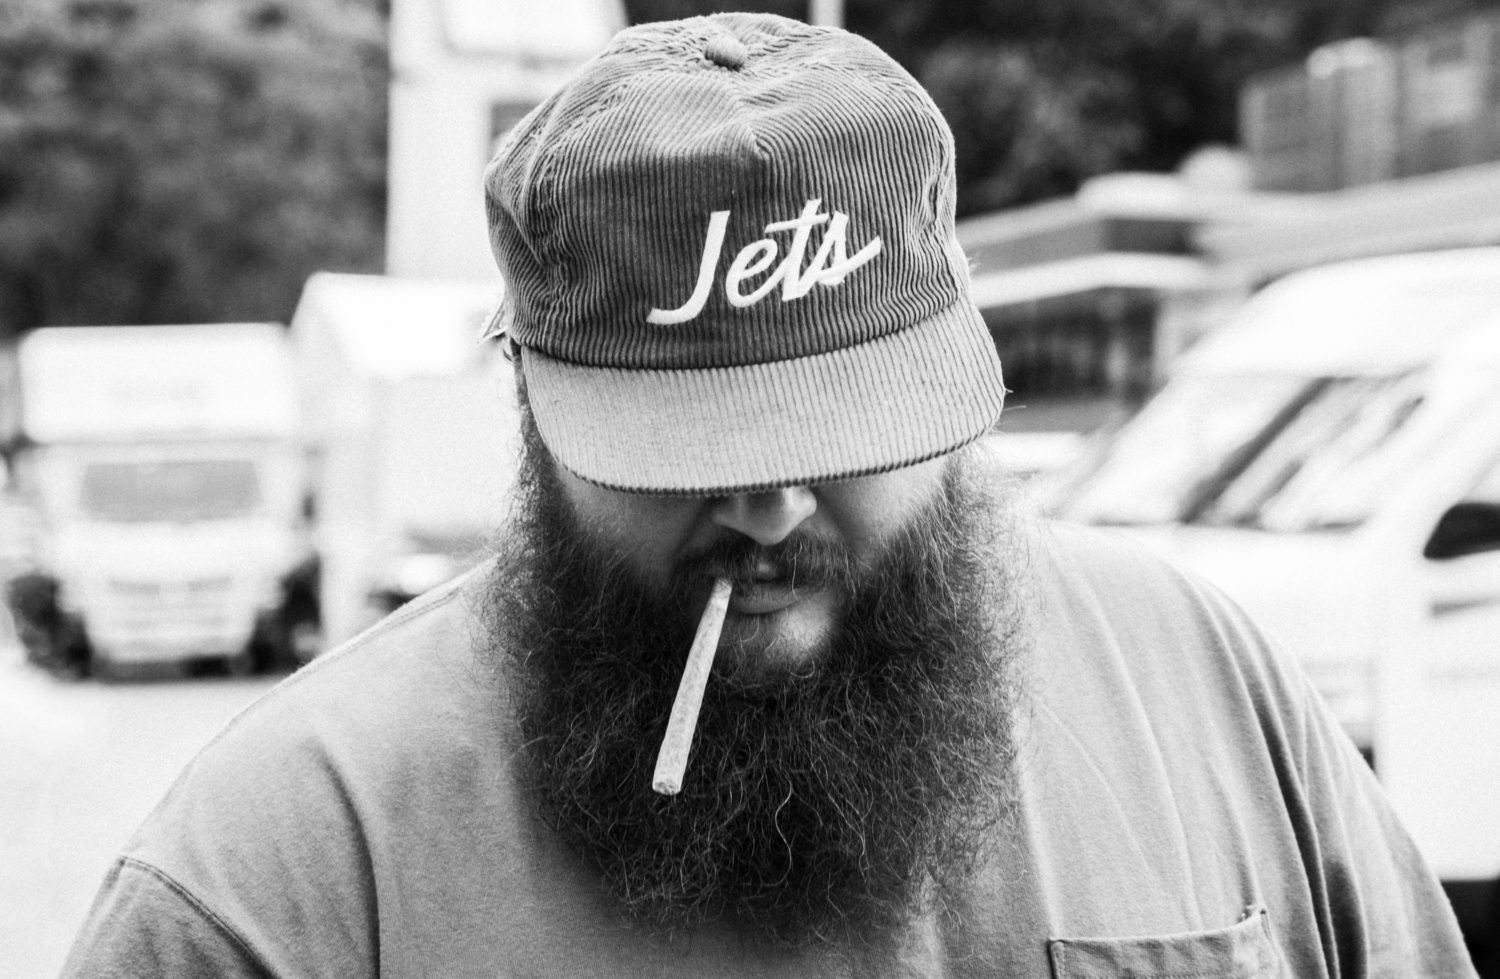 Catch Up With Action Bronson With Cookies Stomper Shatter